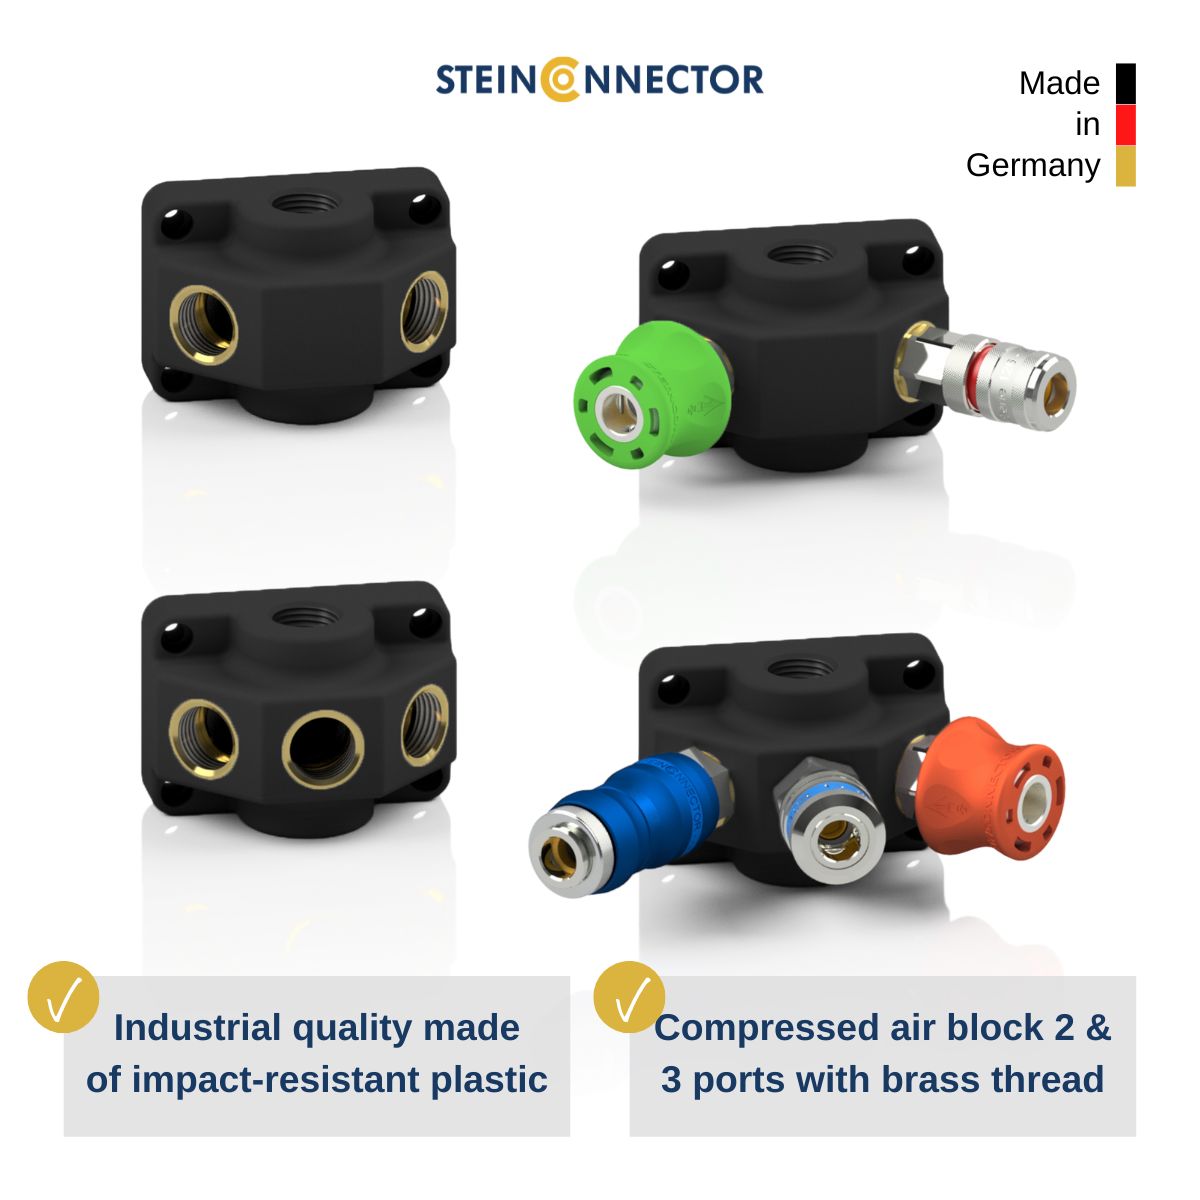 Professional compressed air & pneumatic distributor block & distributor box in industrial quality - glass-fibre reinforced impact-resistant plastic with brass sleeves 1/2 inch in 2 and 3 ports